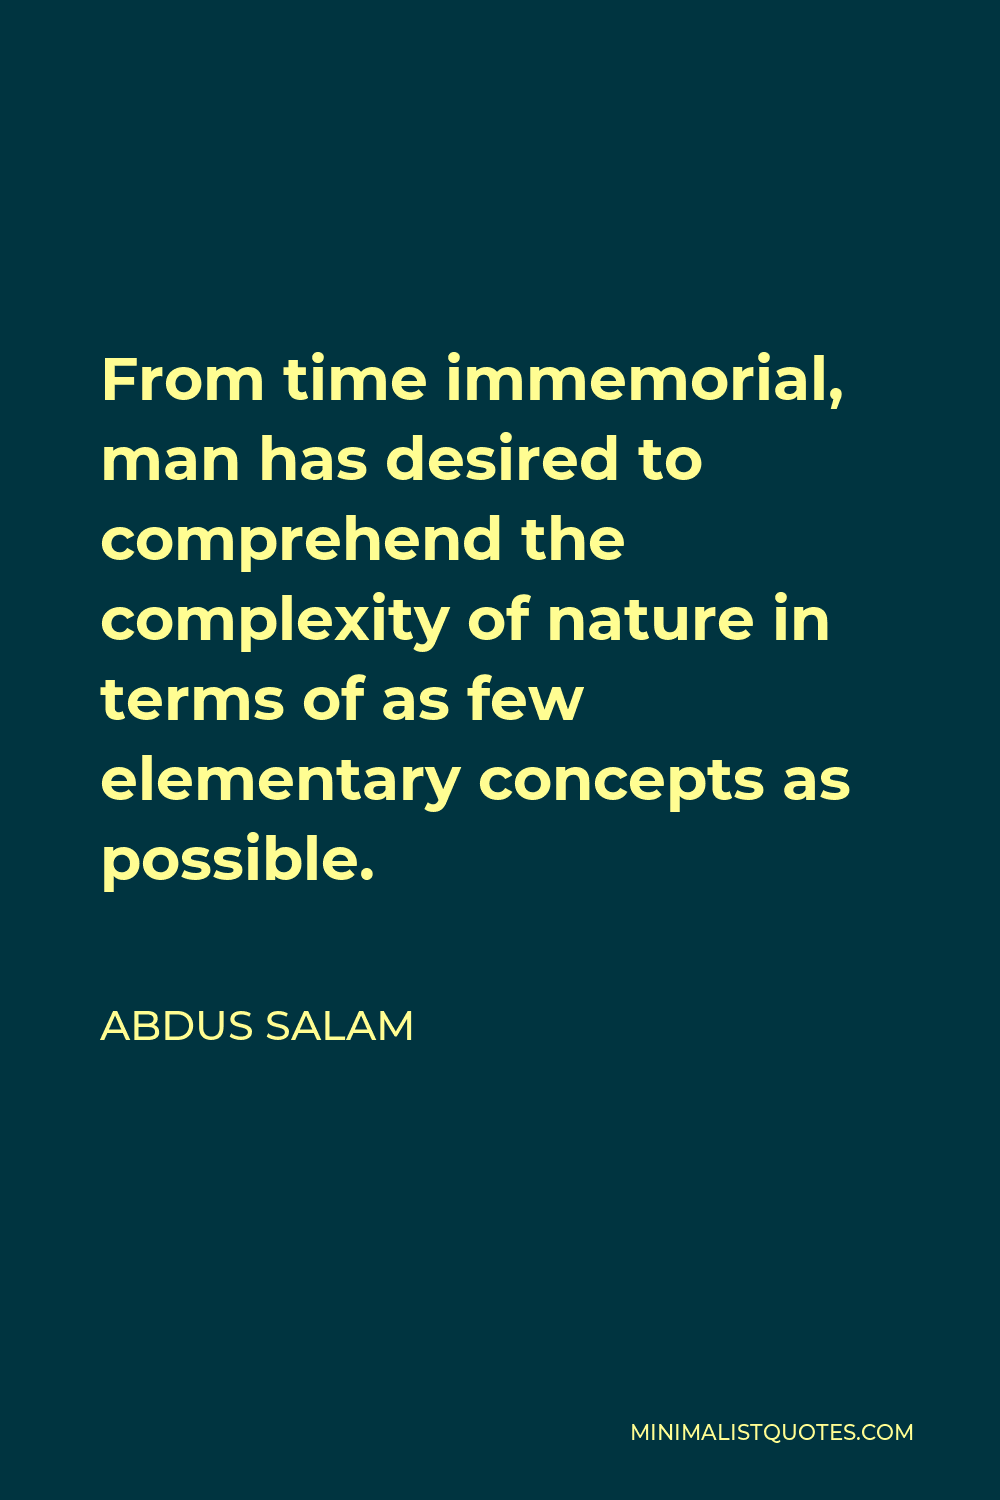 Abdus Salam Quote - From time immemorial, man has desired to comprehend the complexity of nature in terms of as few elementary concepts as possible.